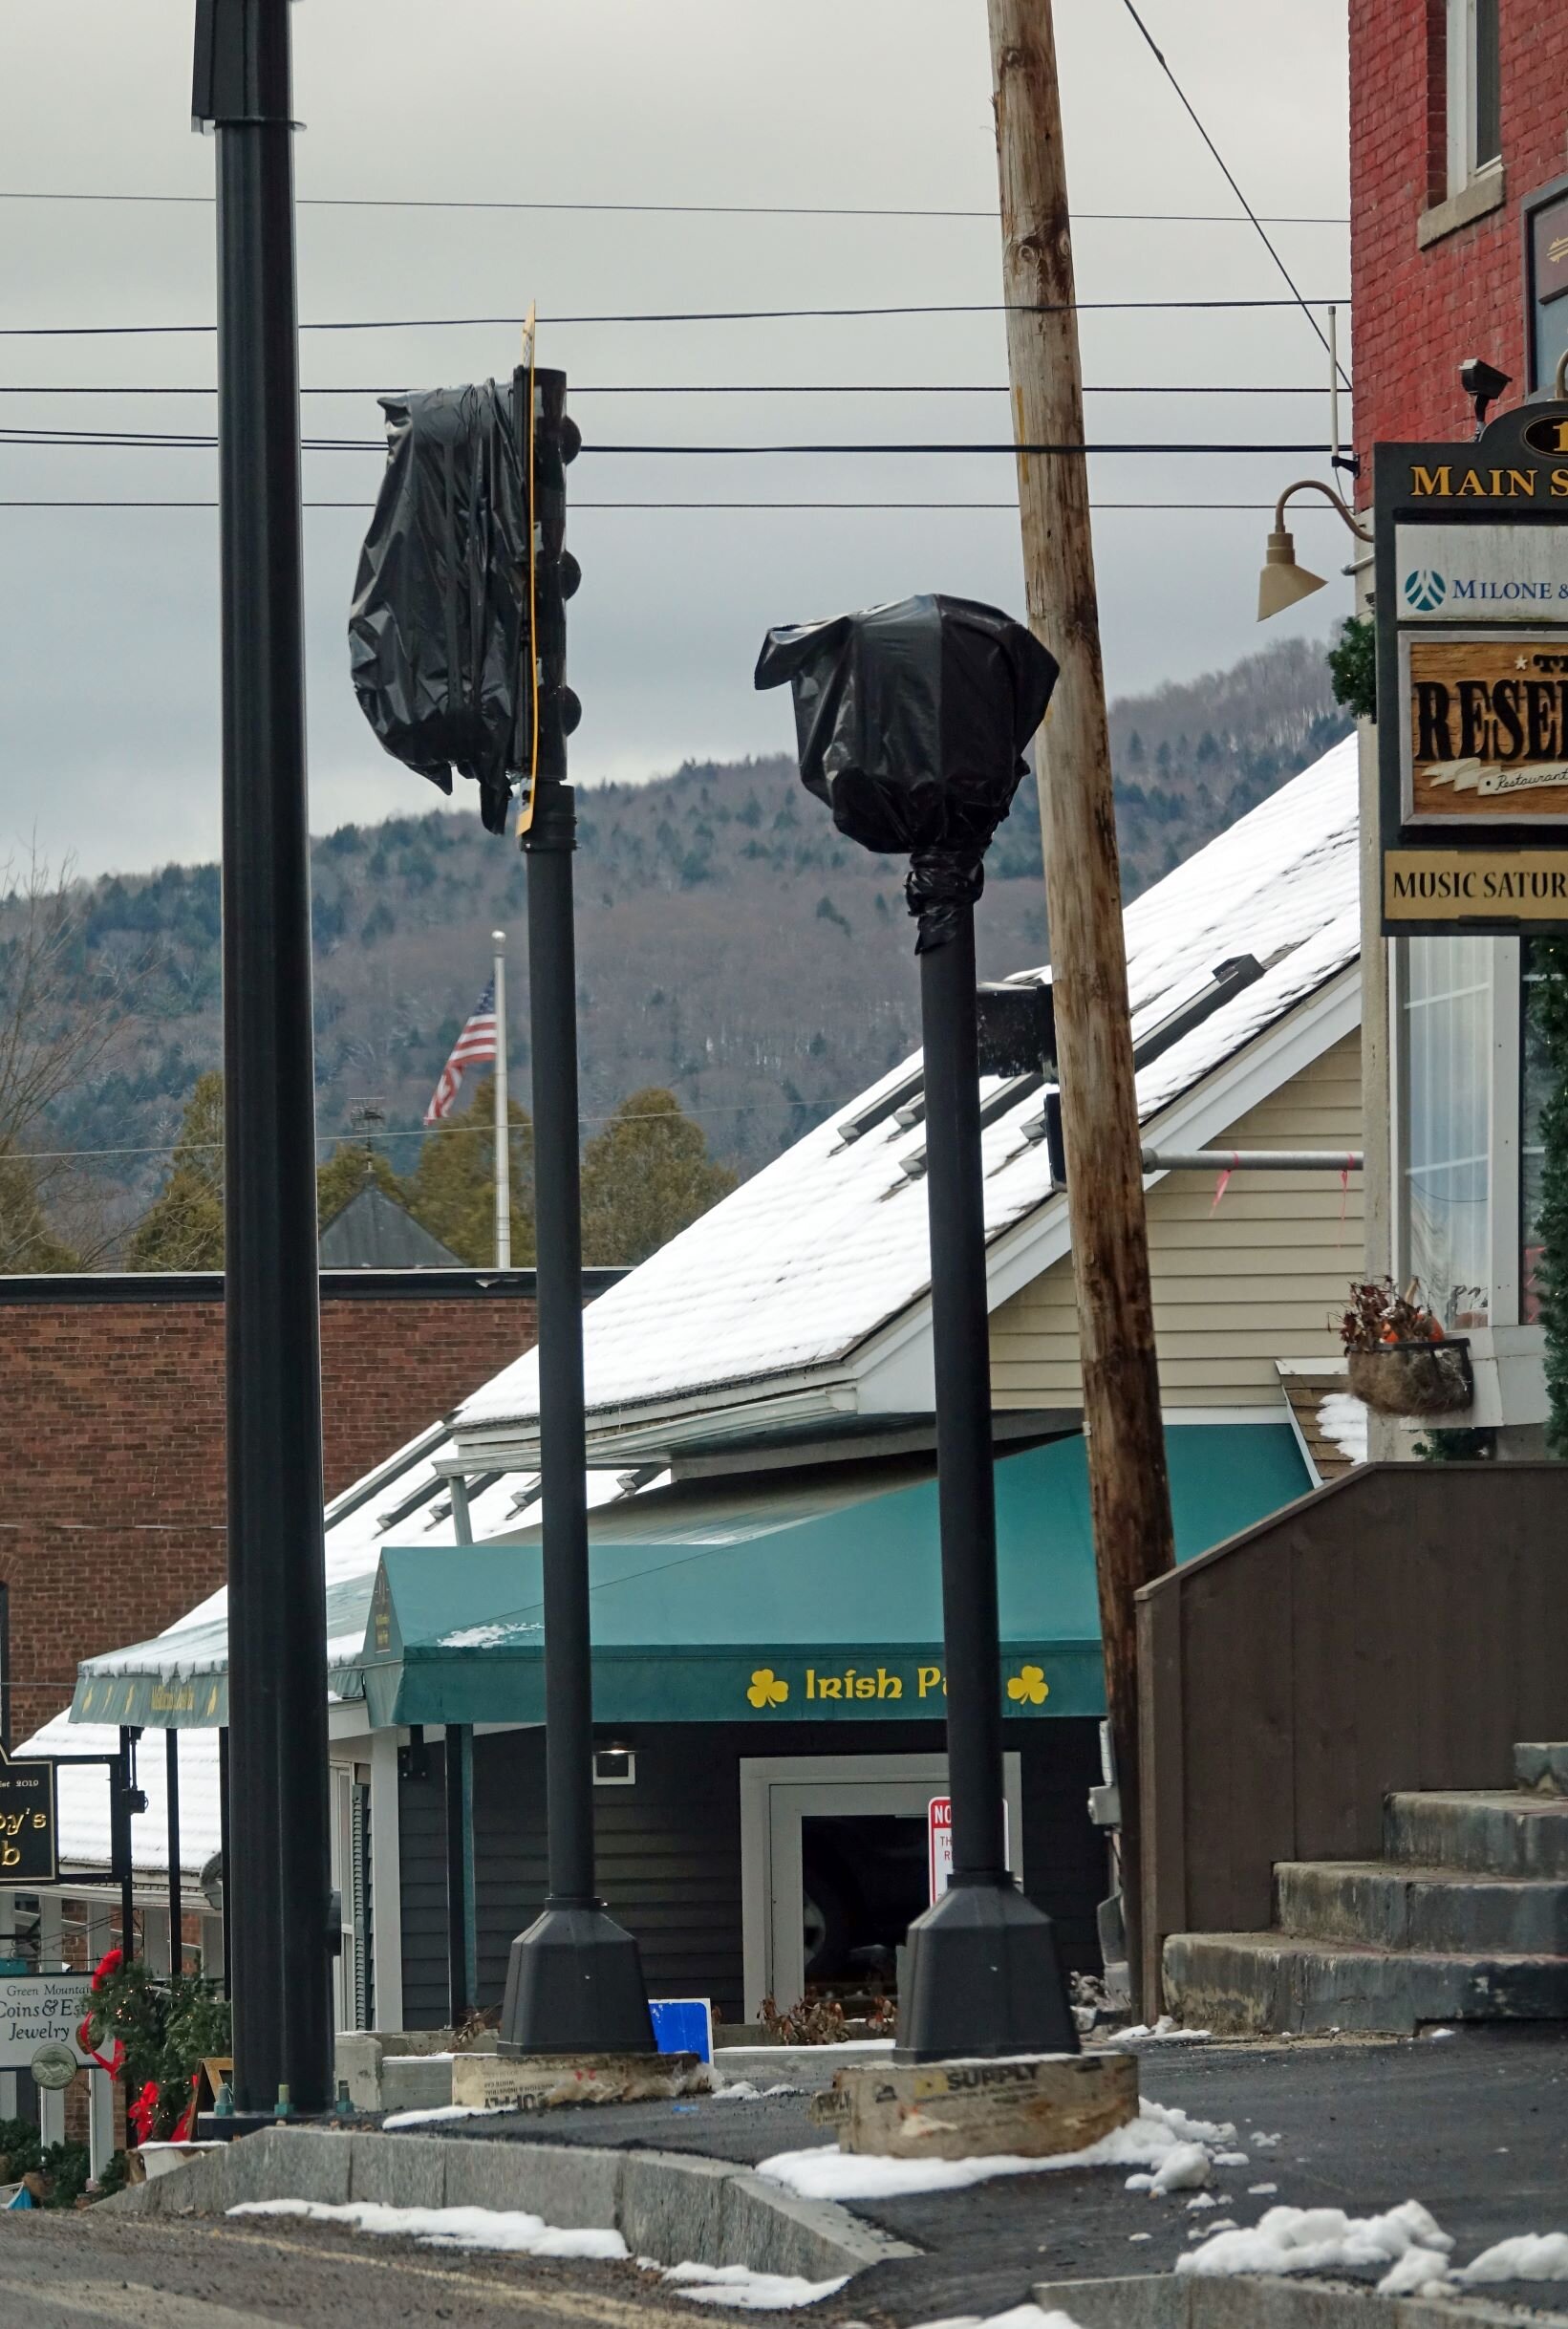   The intersection of Stowe and Main streets will eventually be clear of overhead utility wires. Photo by Gordon Miller.   